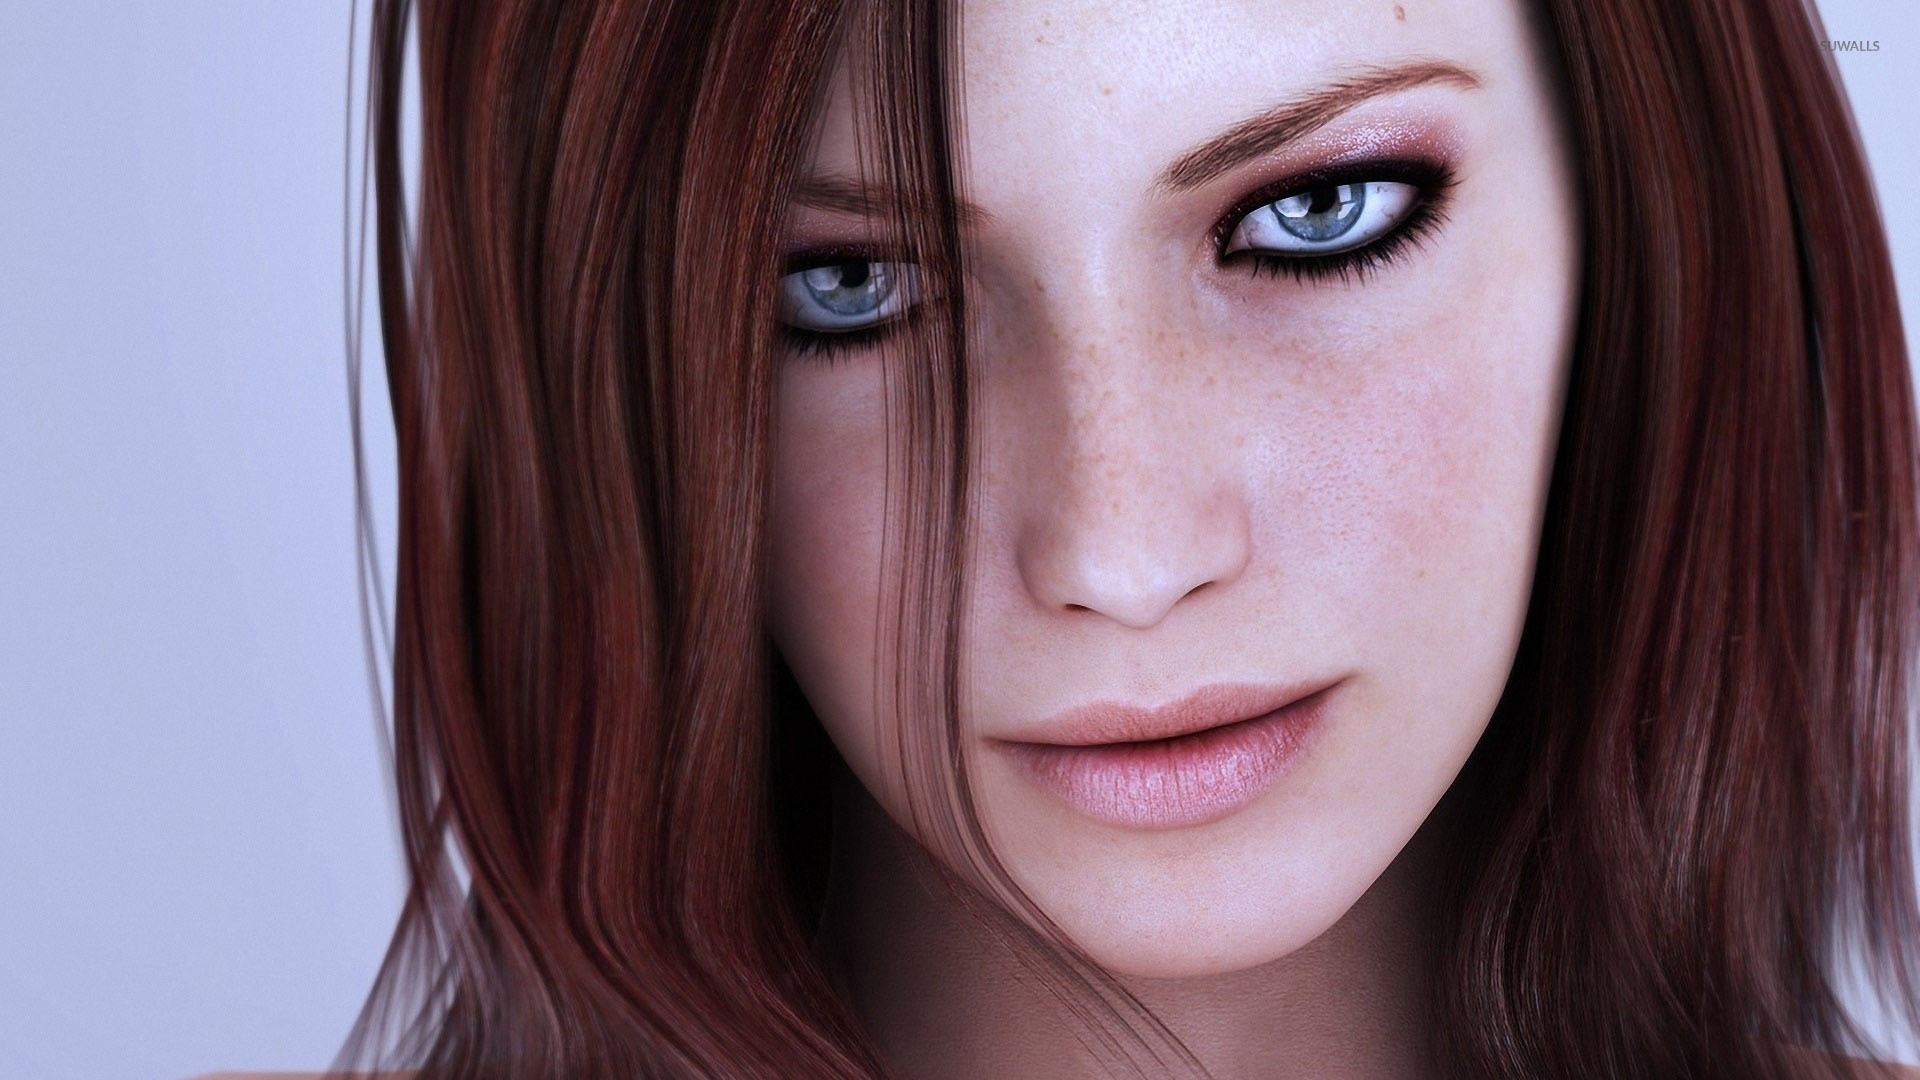 1920x1080 Amazing redhead with freckles wallpaper  jpg